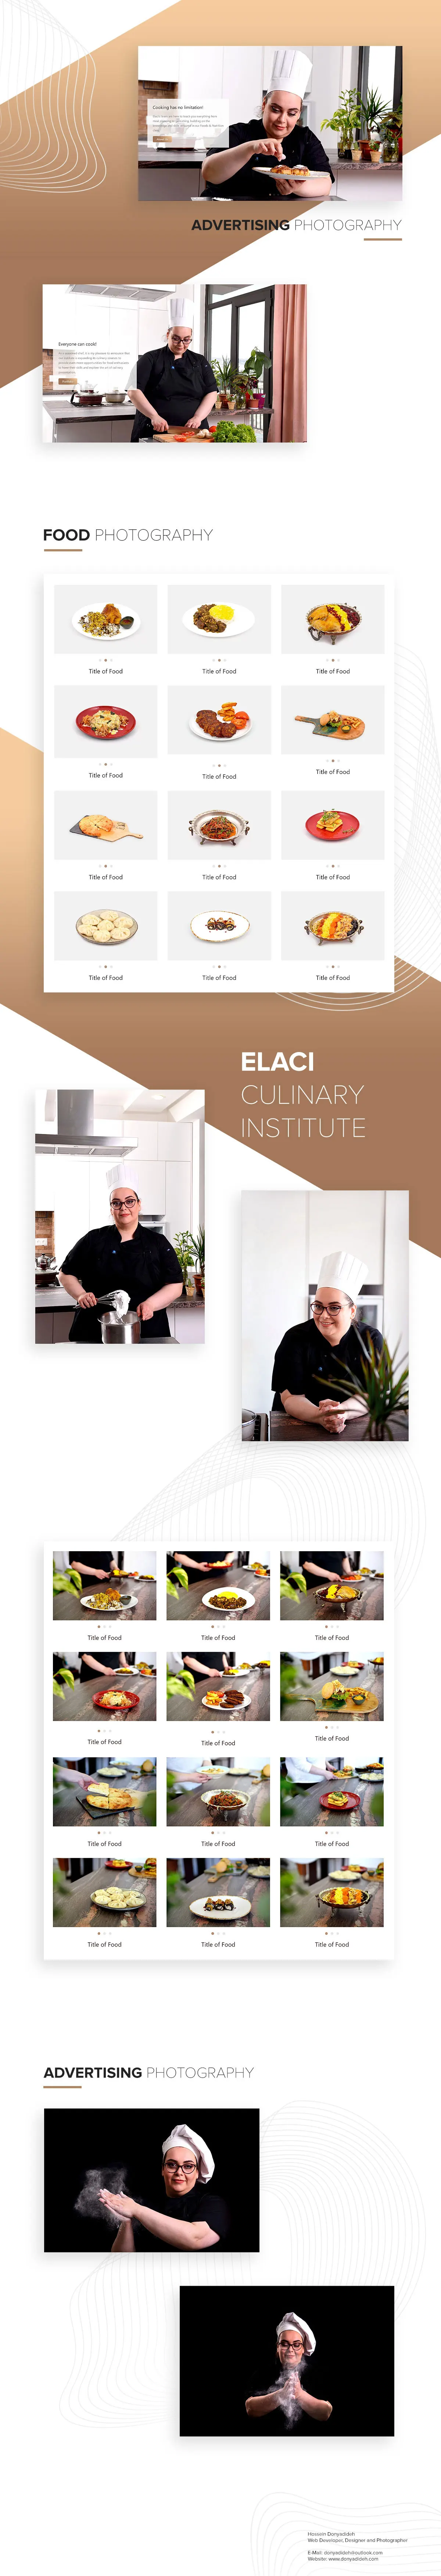 Elaci Culinary Institute Advertising Photography and food photography | Hossein Donyadideh